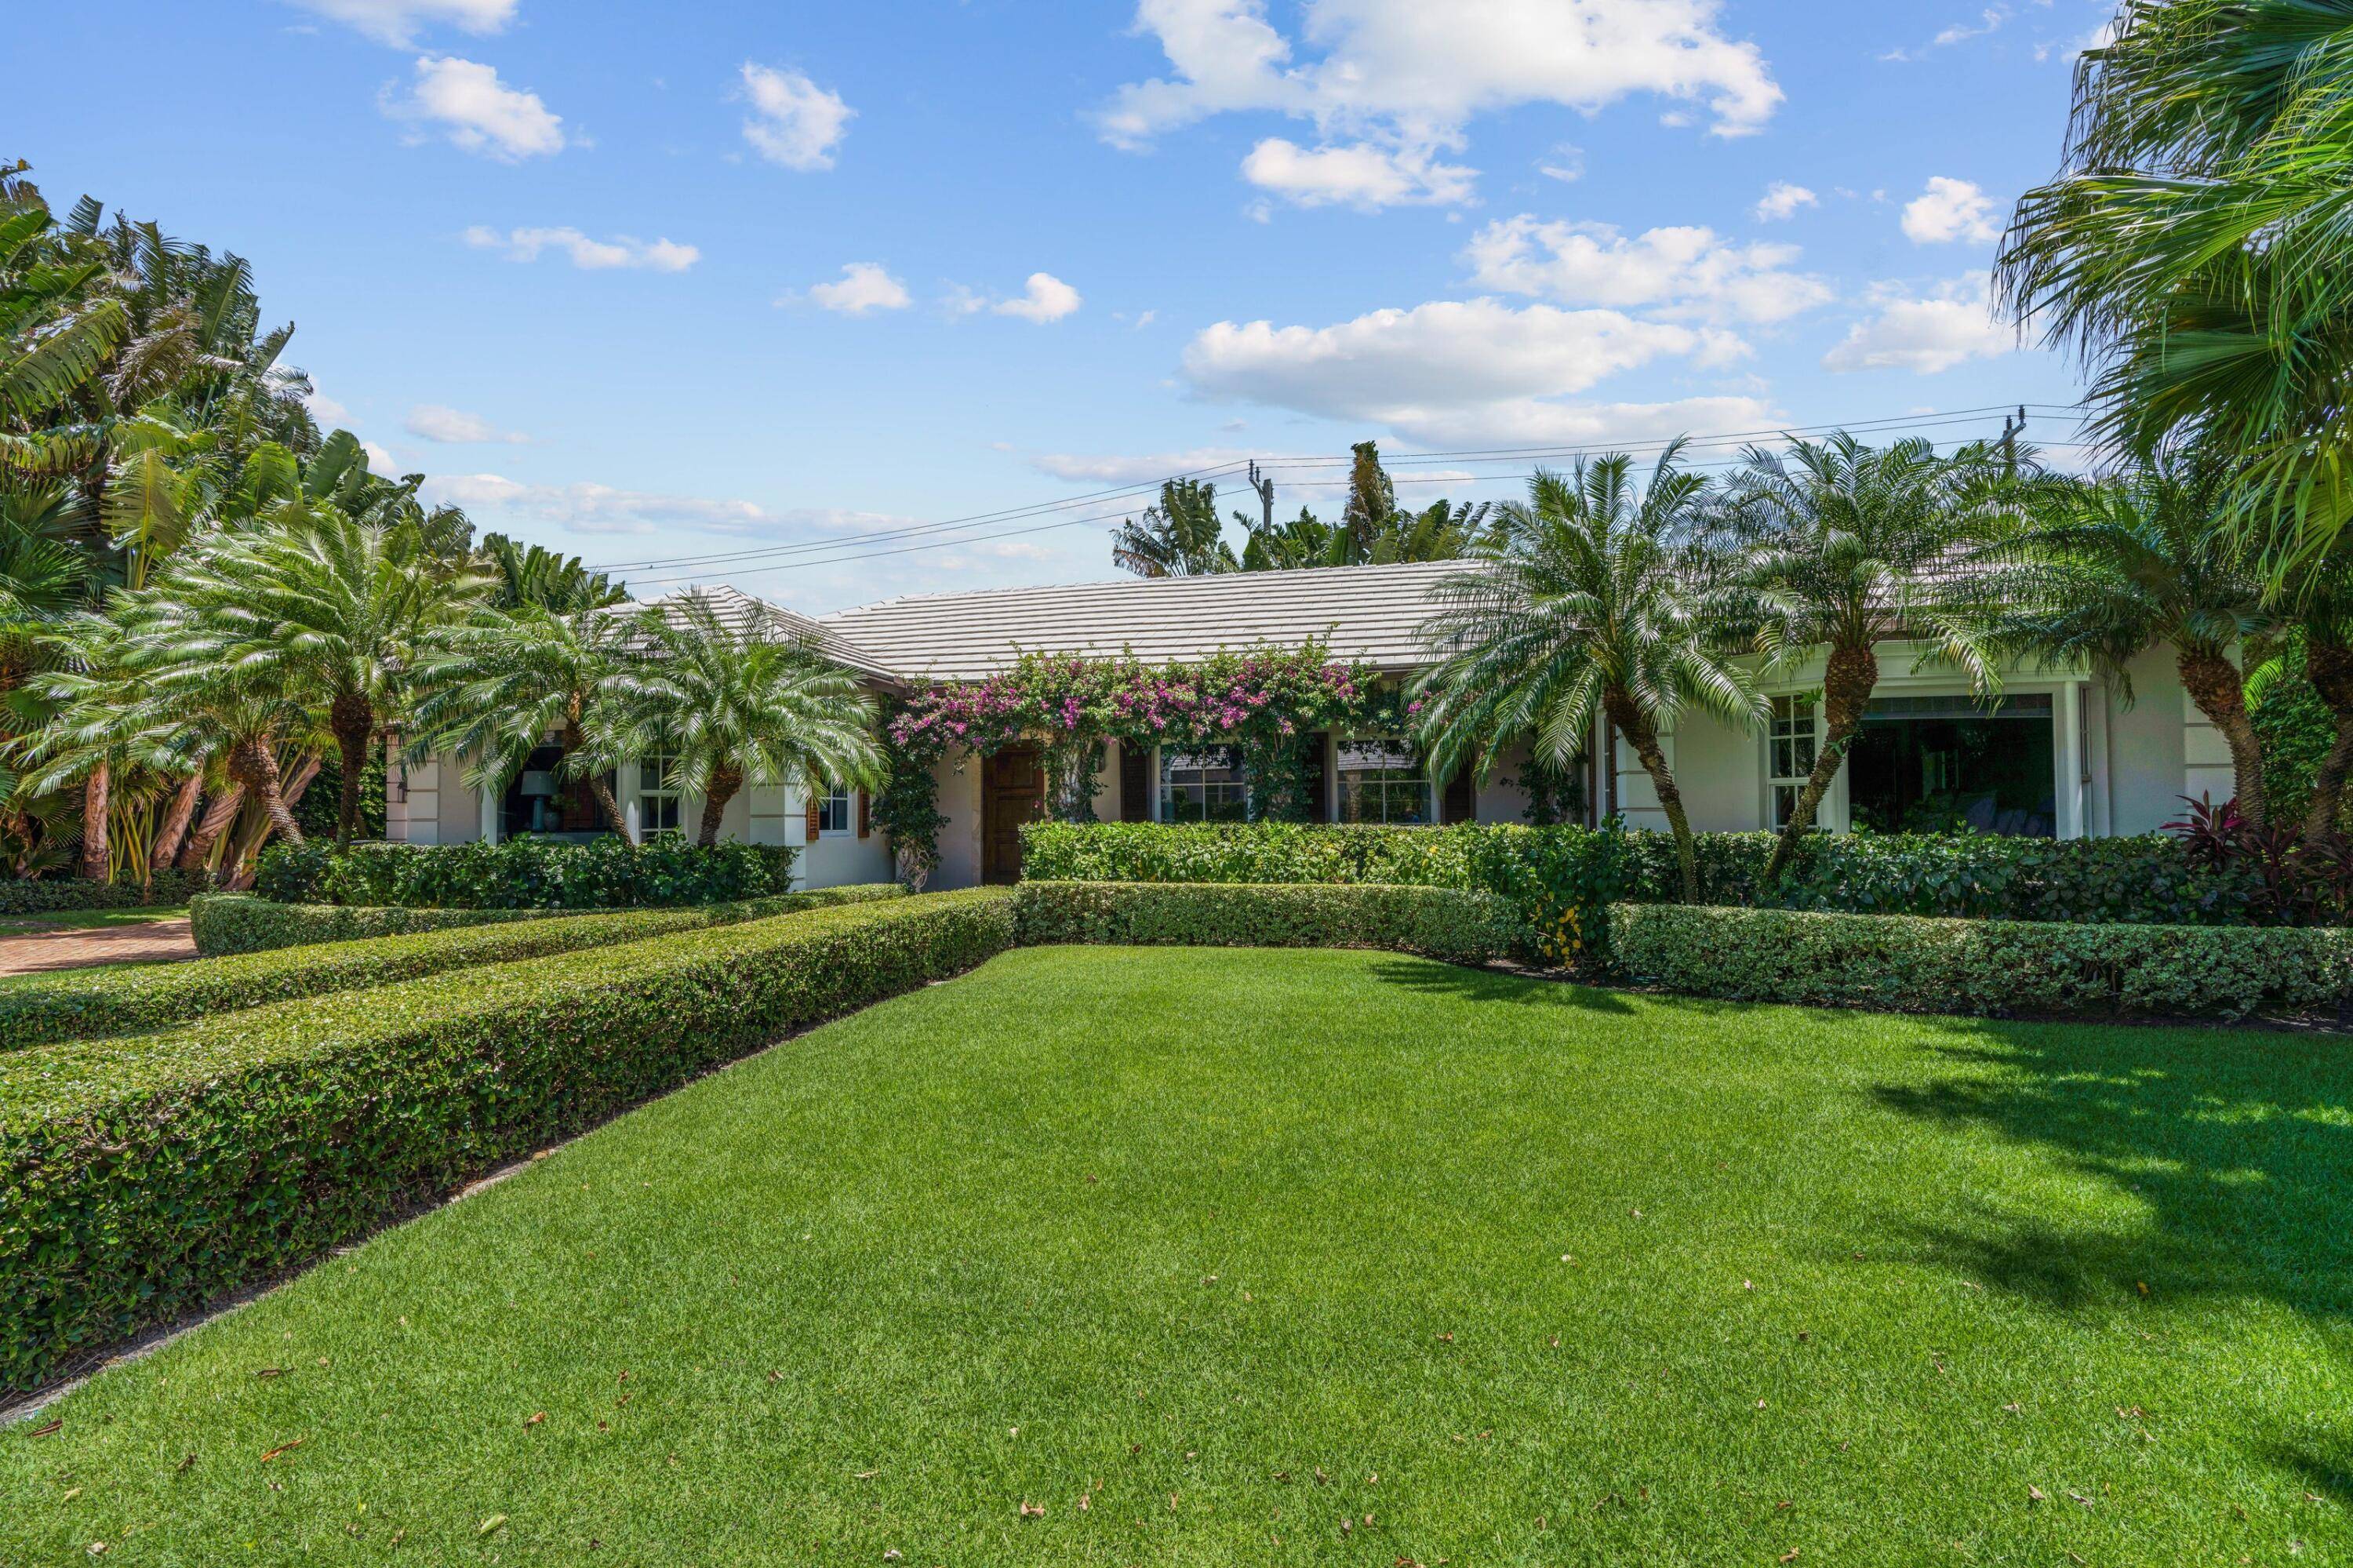 Welcome to 265 List Road a completely renovated single story home ideally located in the North End of Palm Beach.